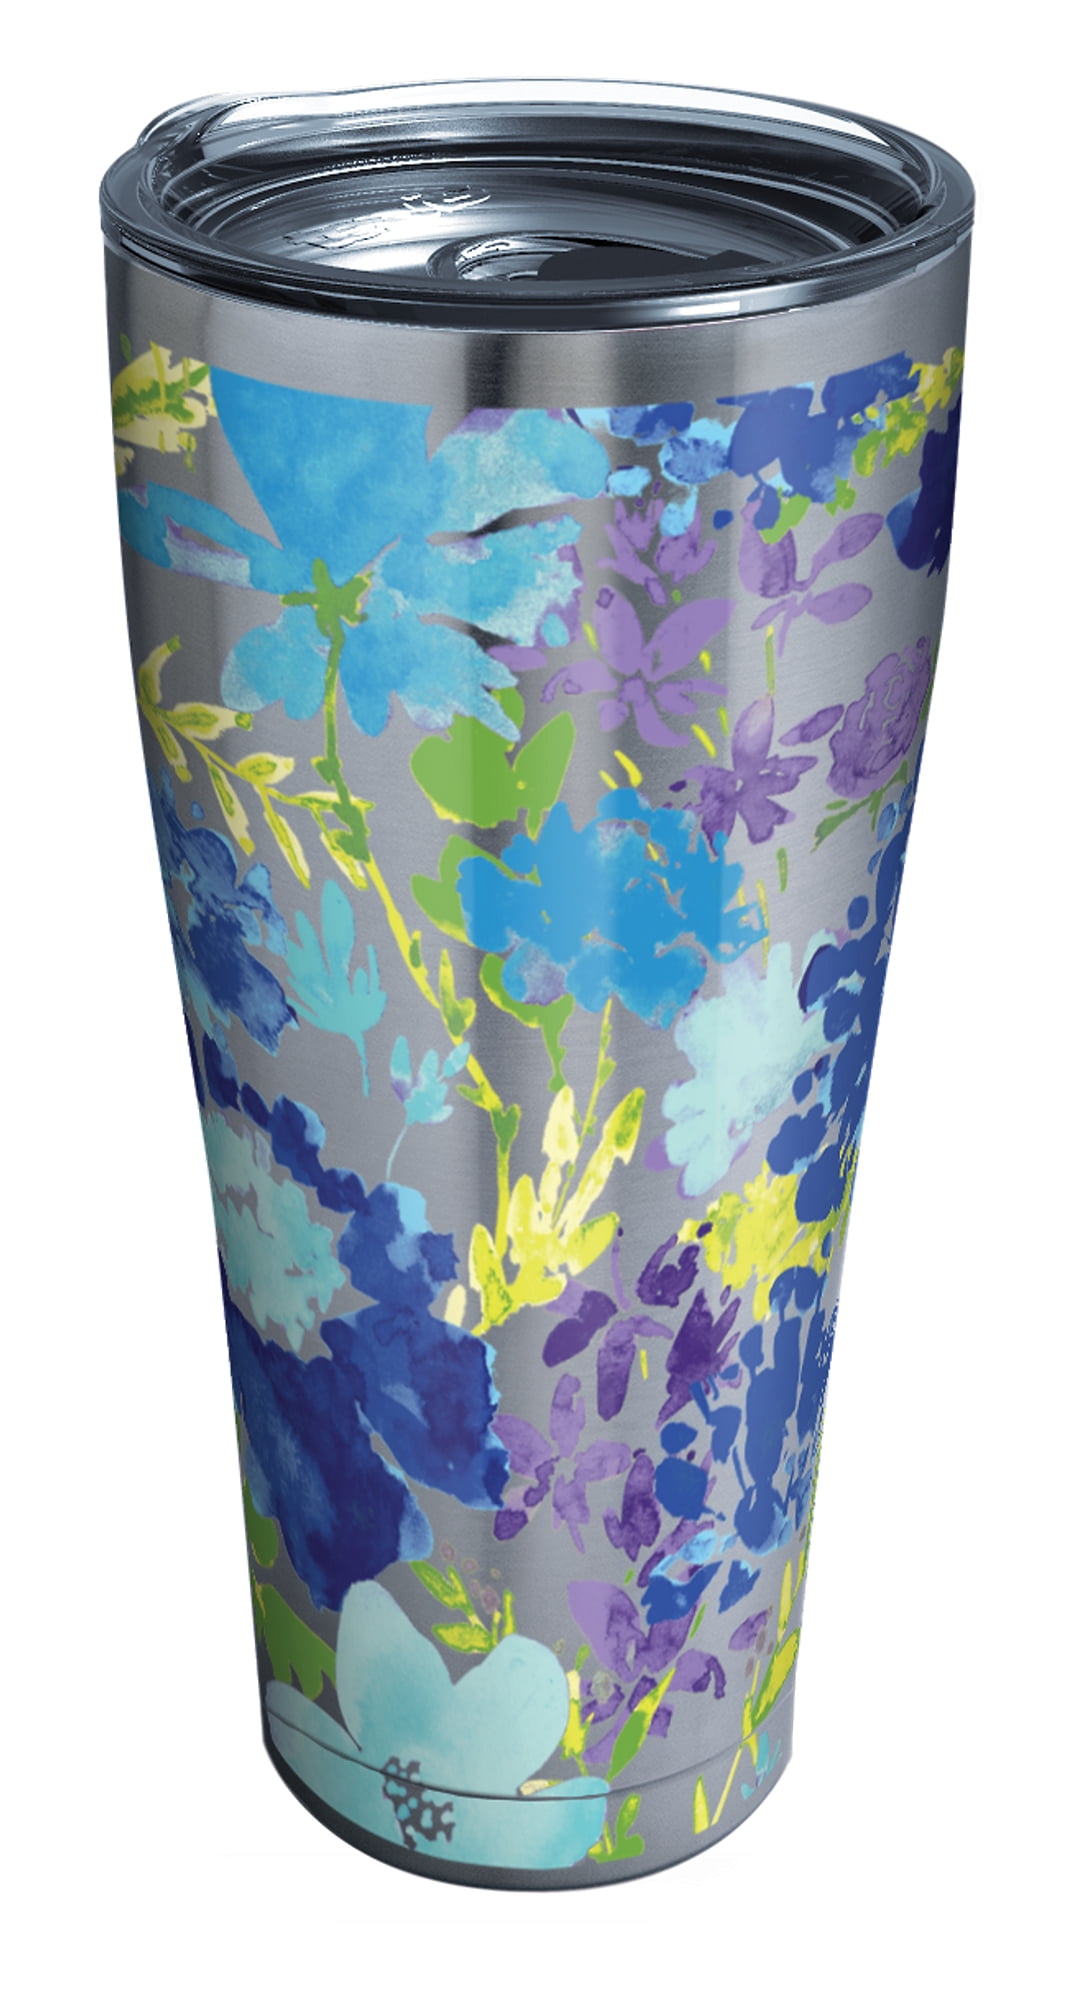 Tervis Yao Cheng-Sakura Floral Triple Walled Insulated Tumbler Stainless Steel 17oz Water Bottle